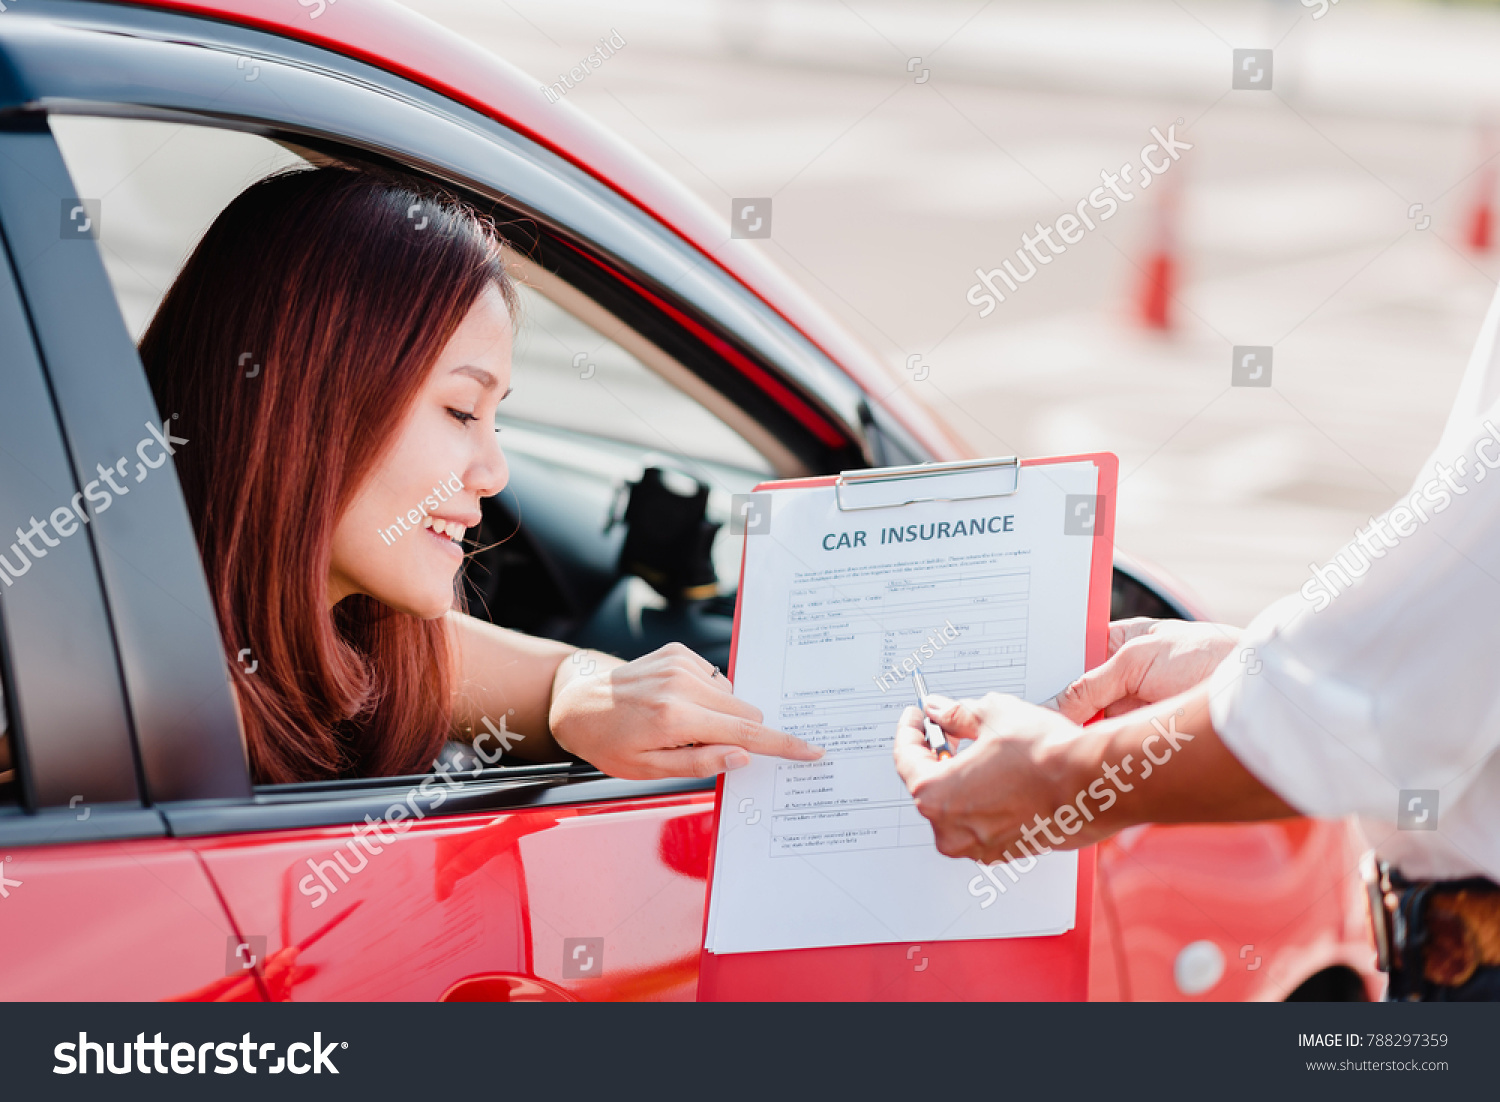 Insurance agent hand over car insurance document to asian woman client in car #788297359